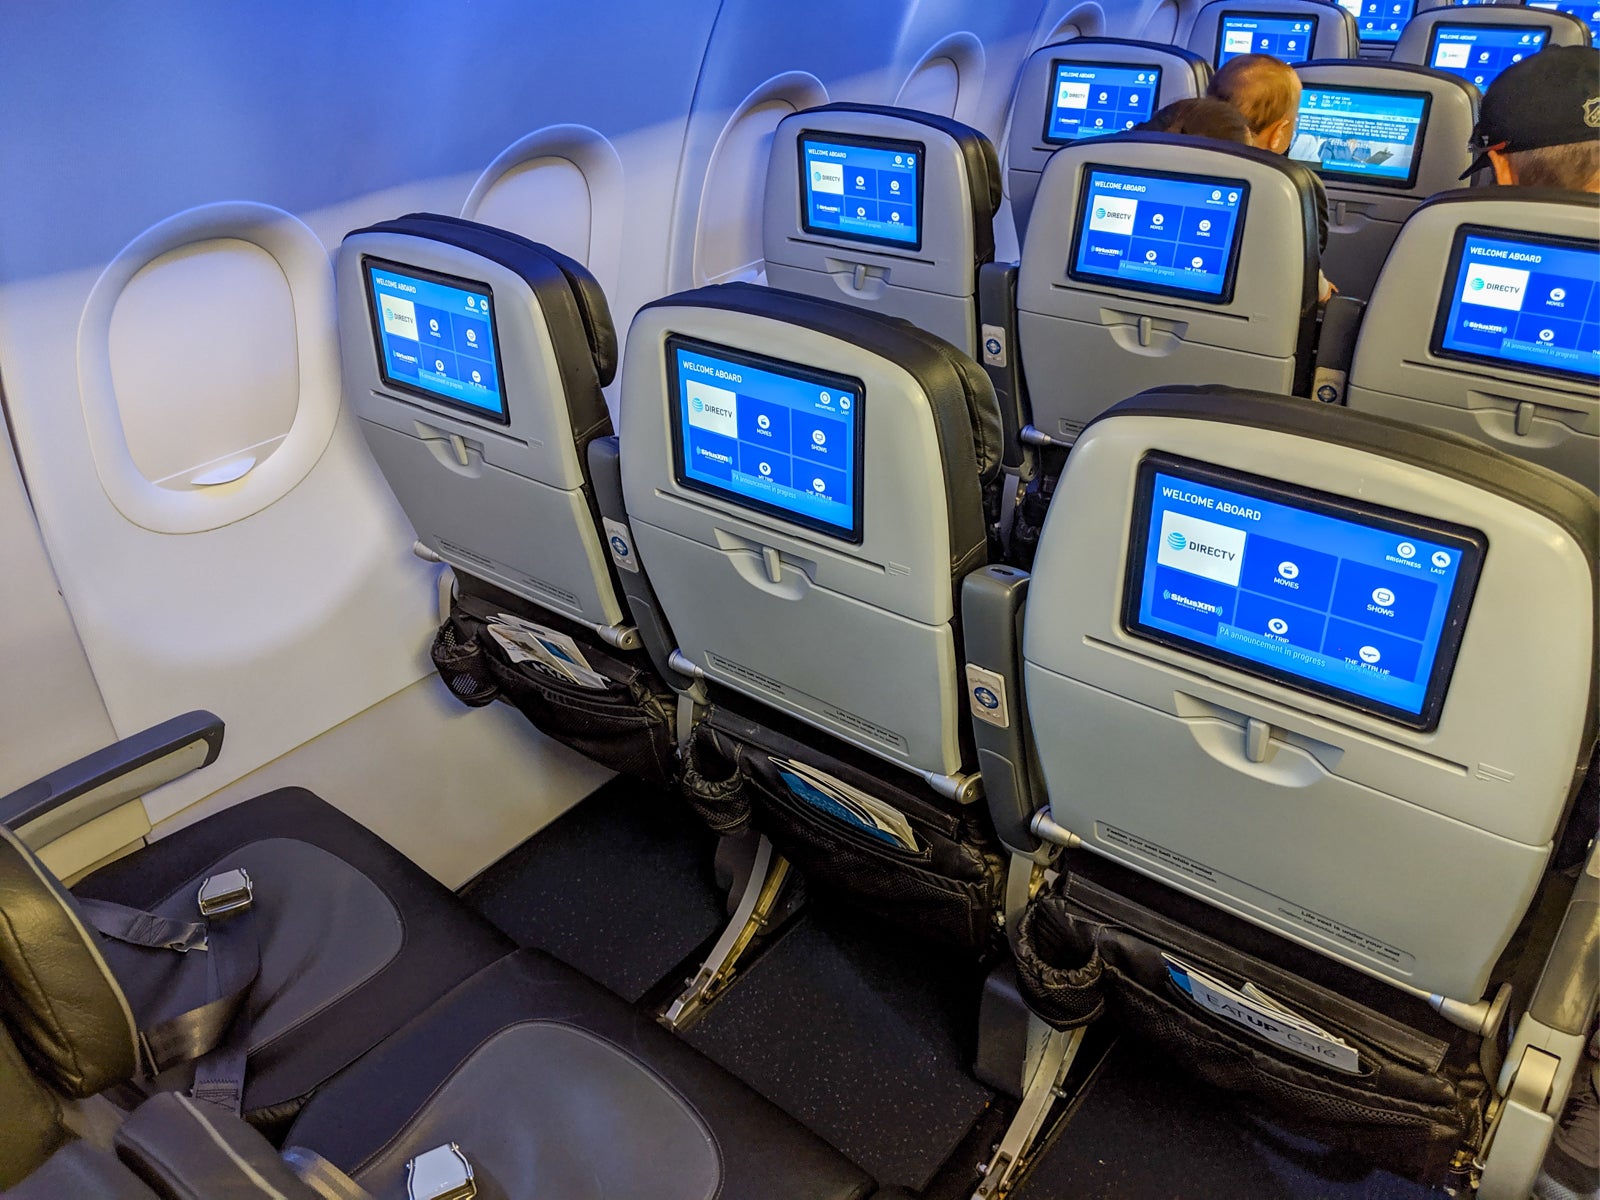 JetBlue gives its inflight entertainment a boost